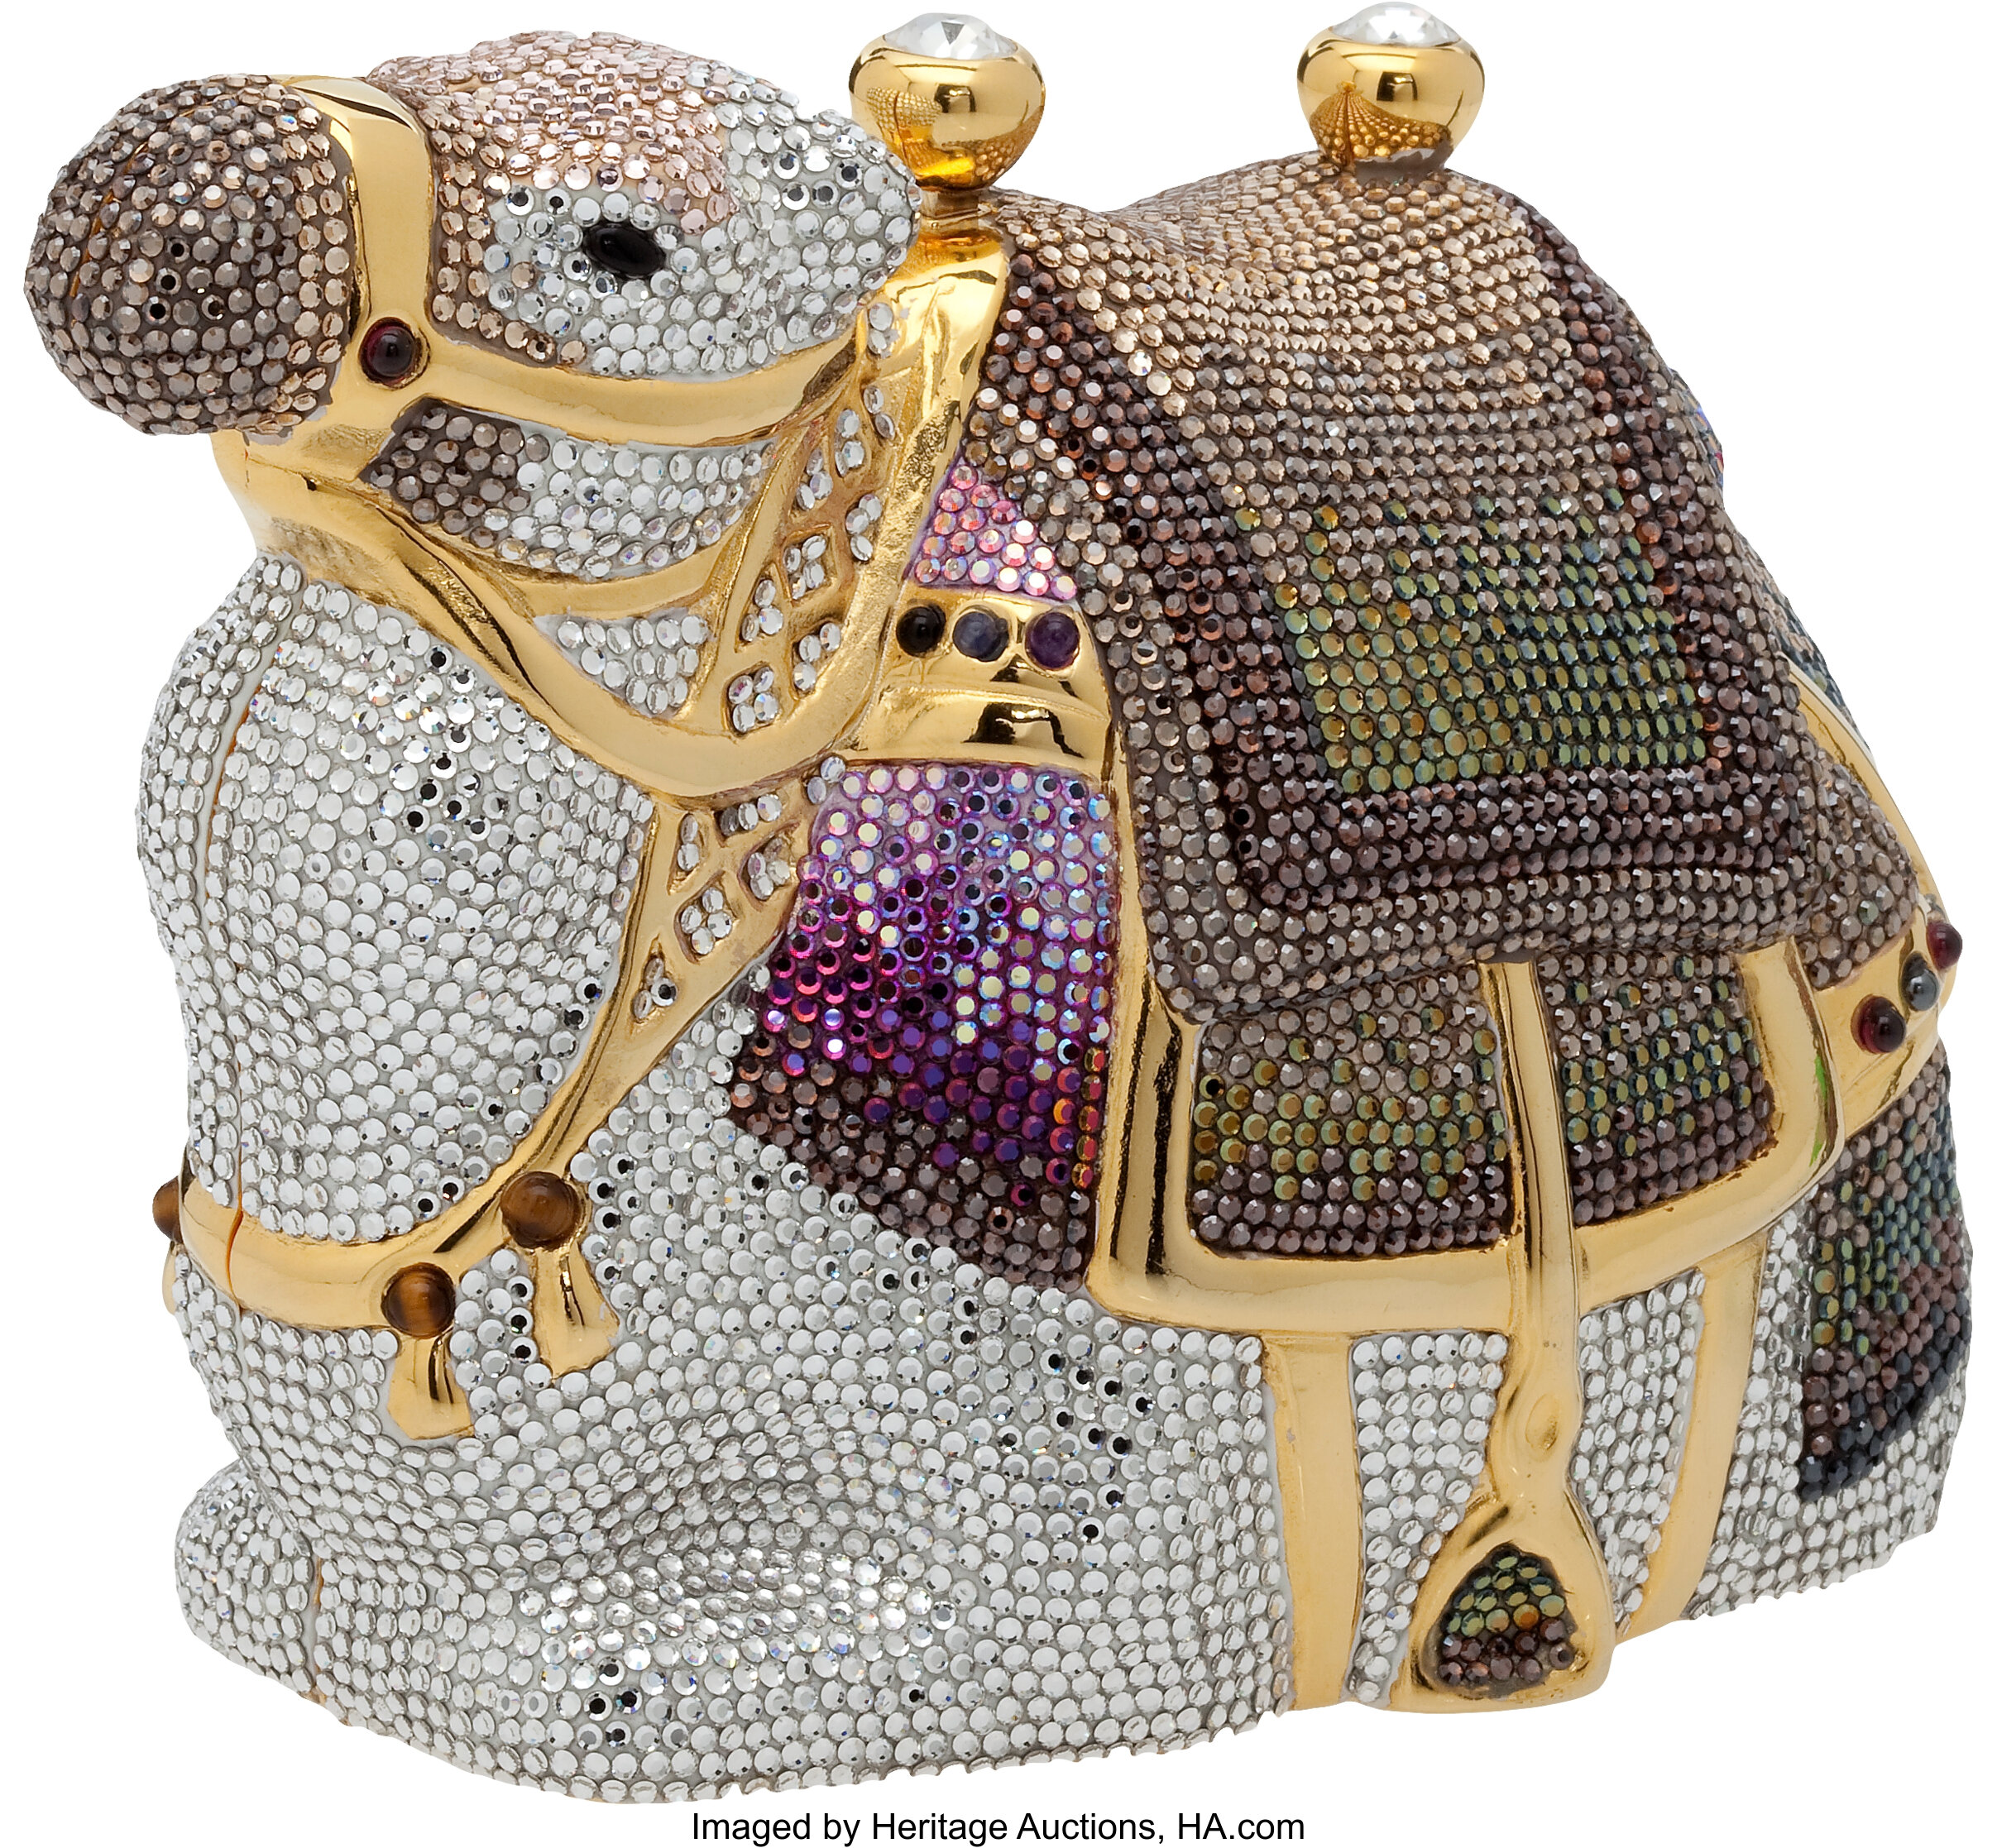 Judith Leiber Bags and Accessories for Sale | Value Guide | Heritage ...